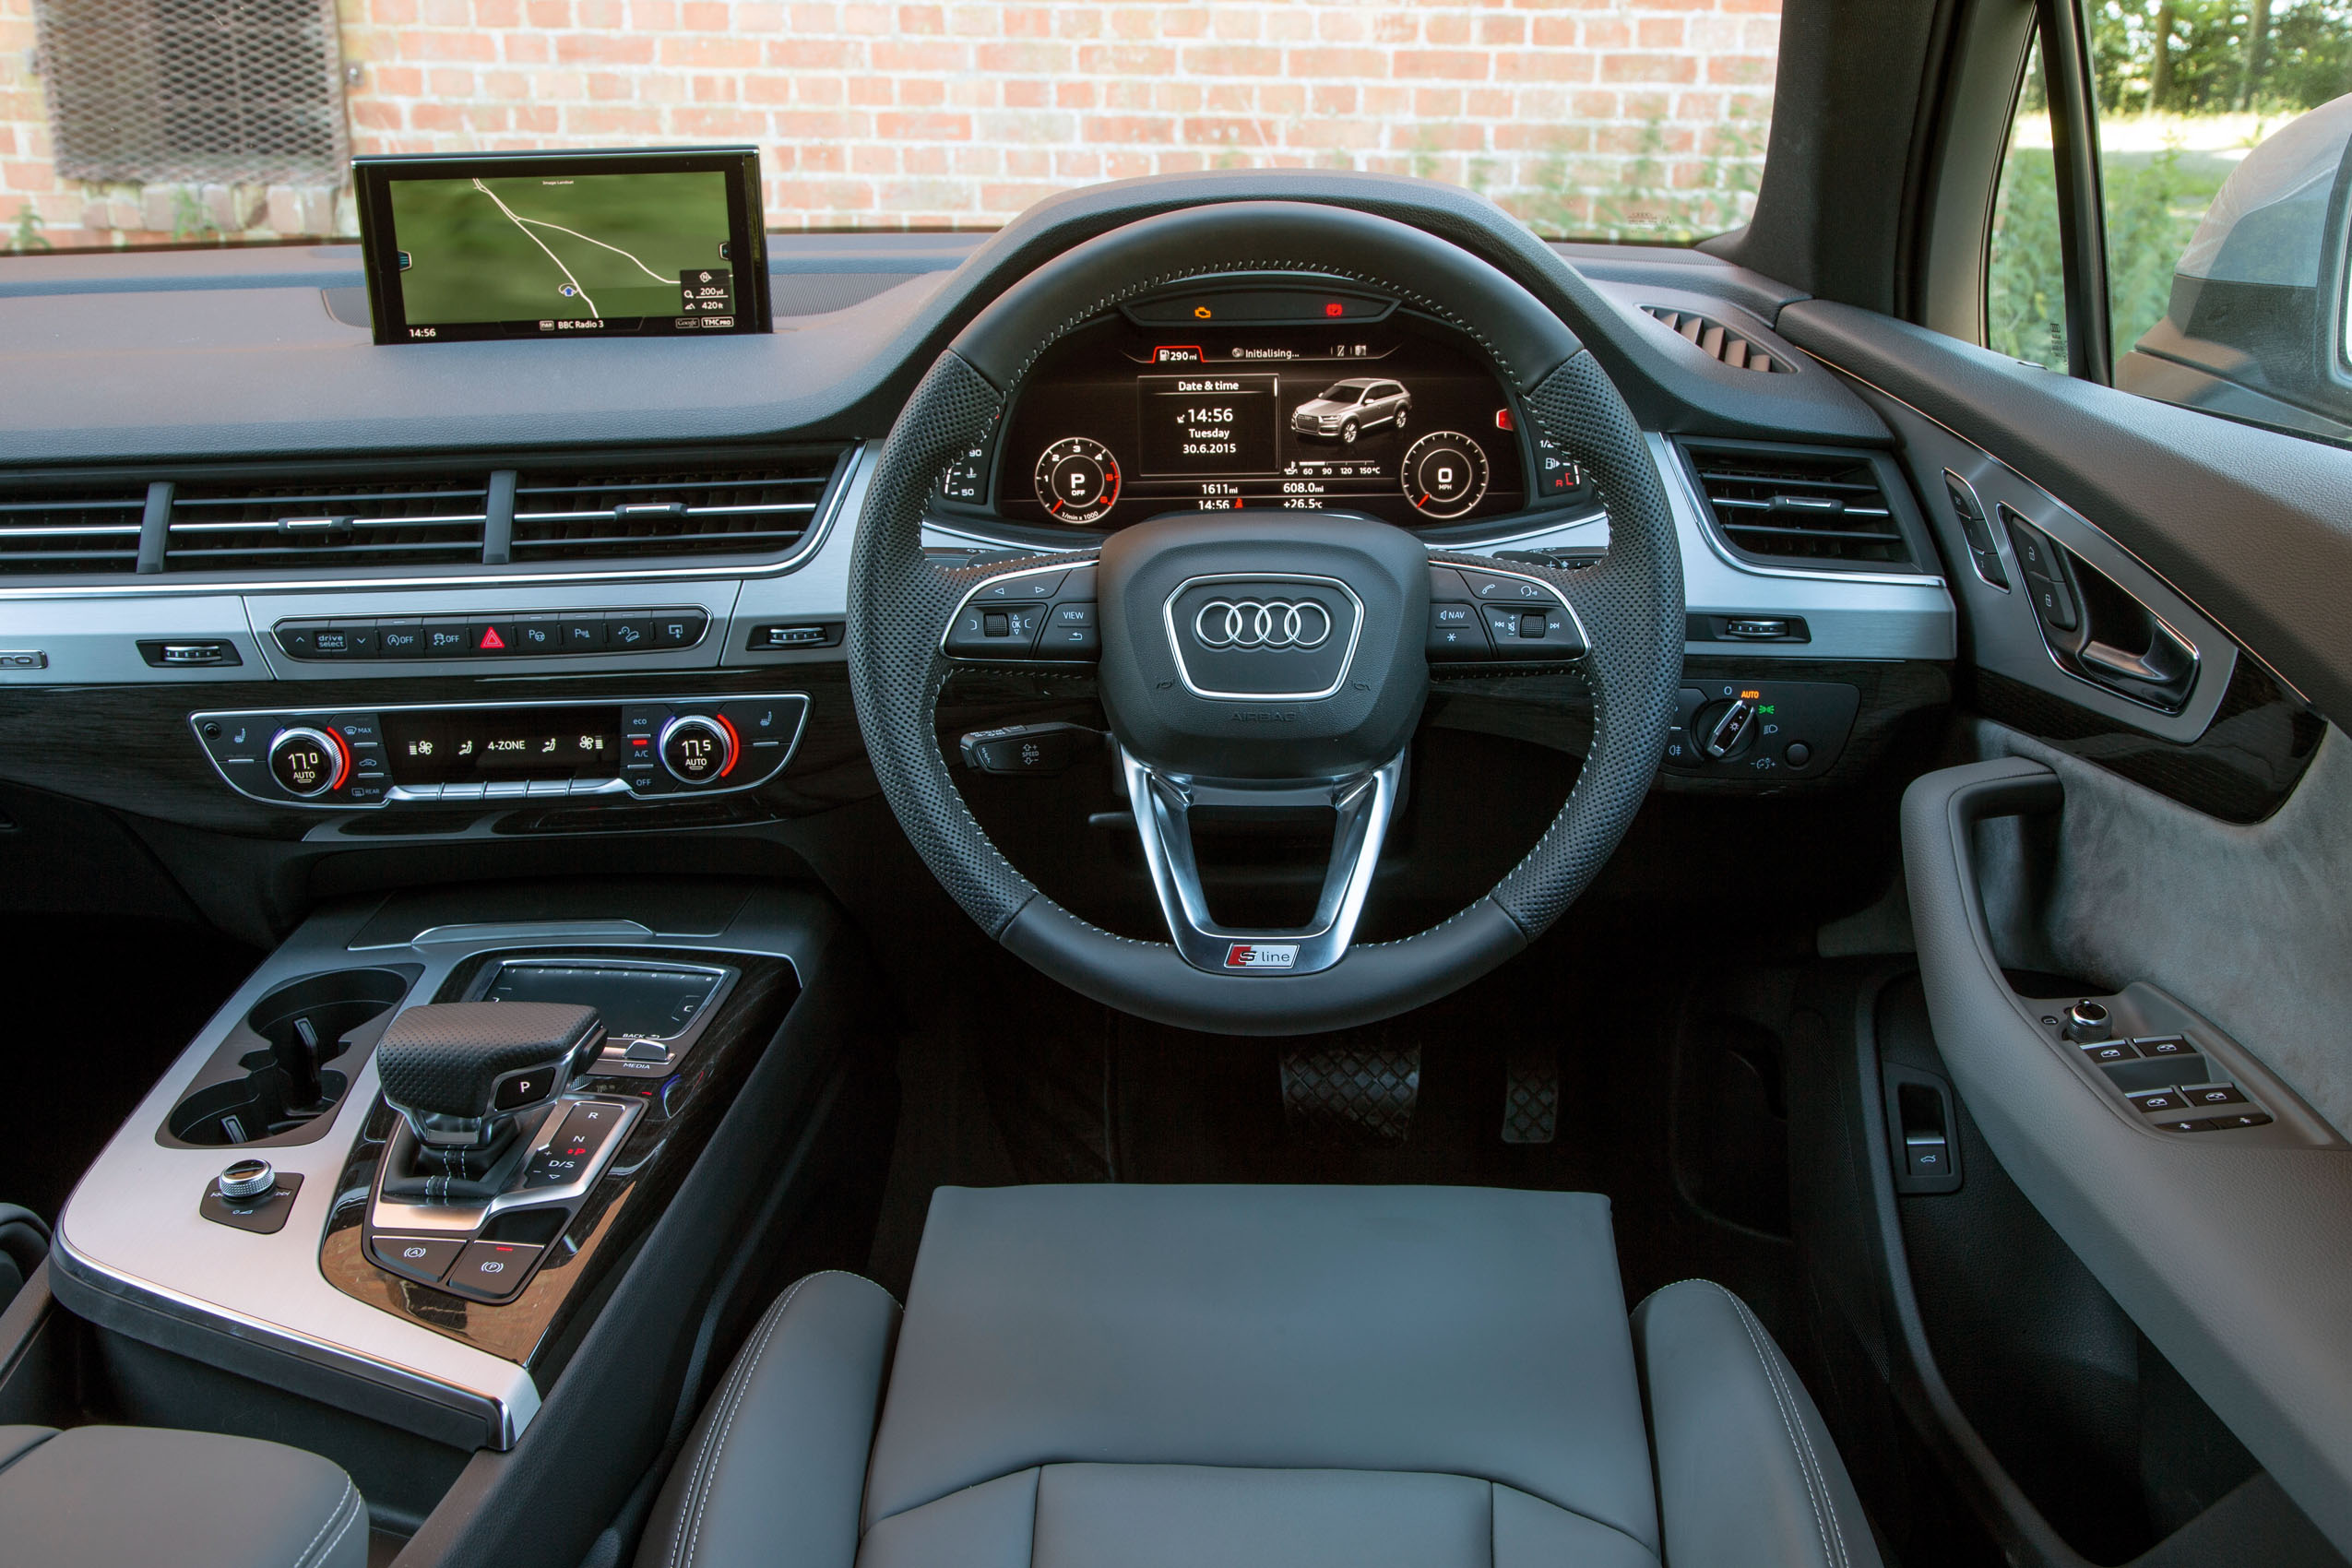 The view from the driver's seat on the Audi Q7